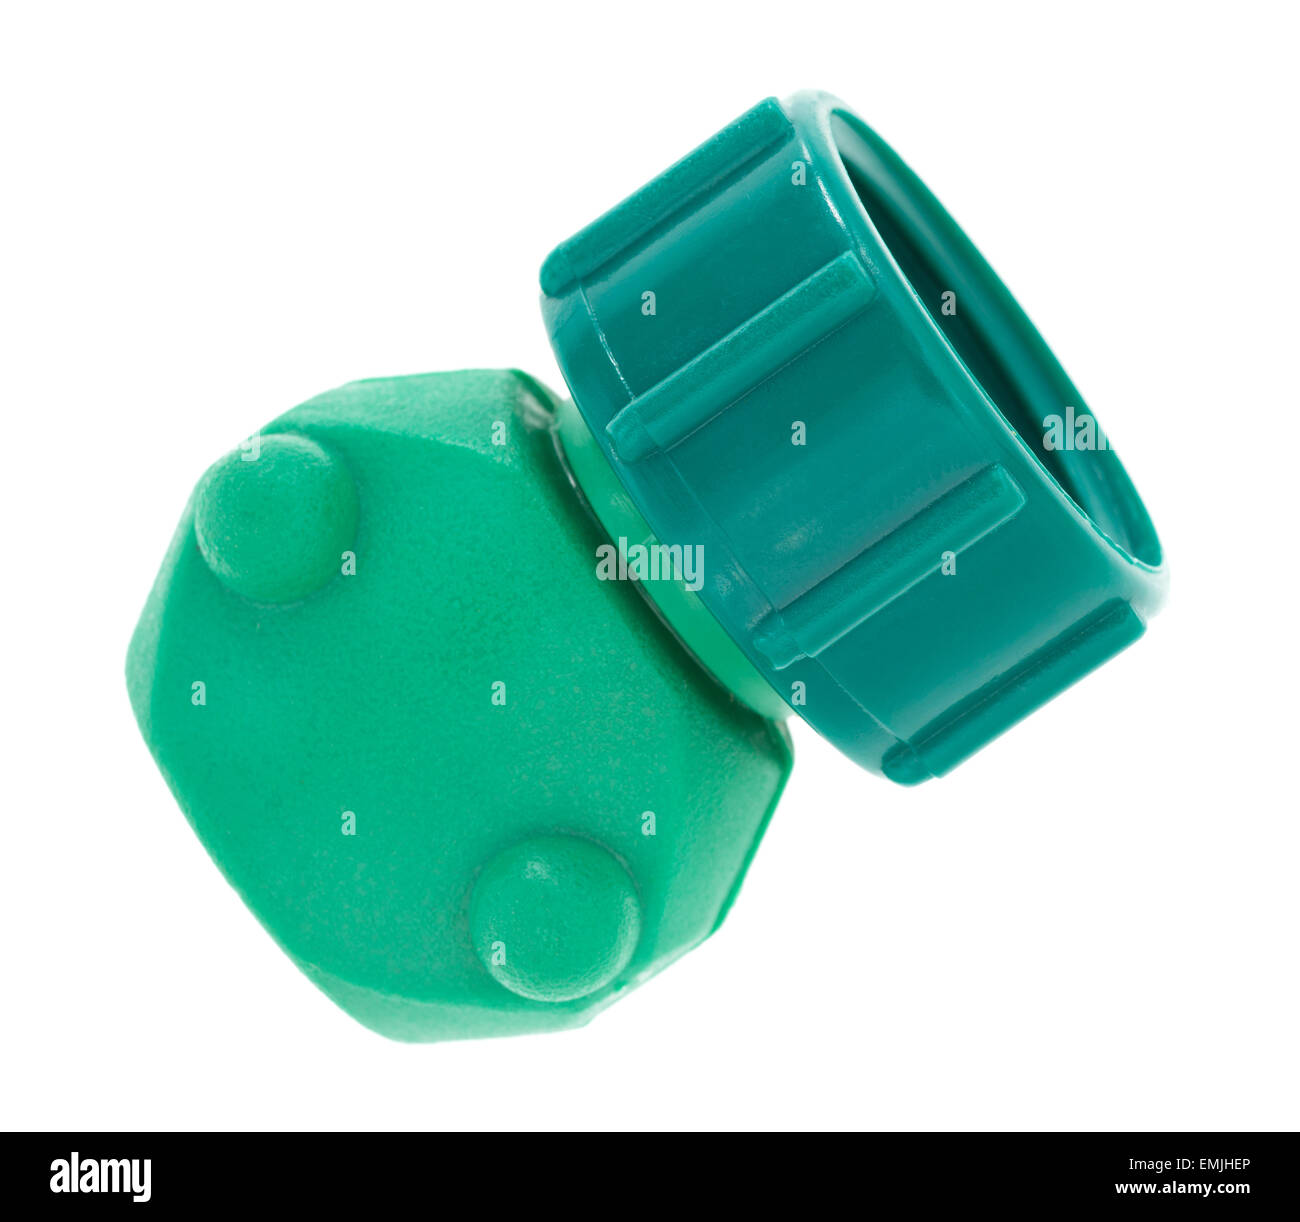 A new female hose coupling for fixing garden hoses on a white background. Stock Photo